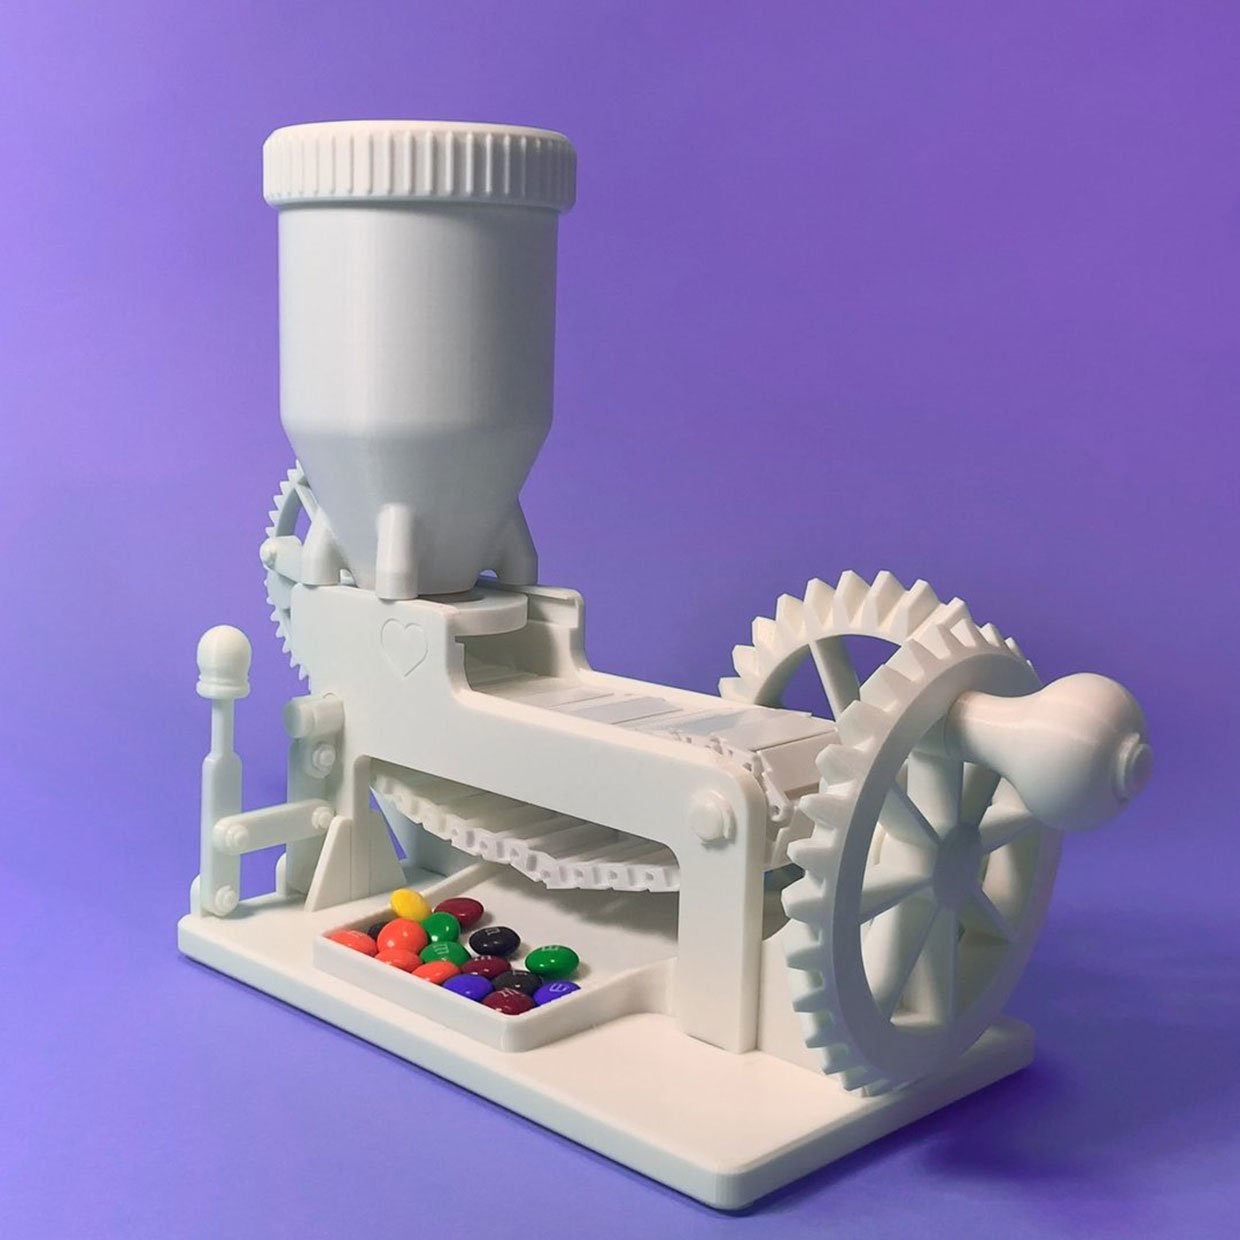 Over-engineered Candy Dispenser